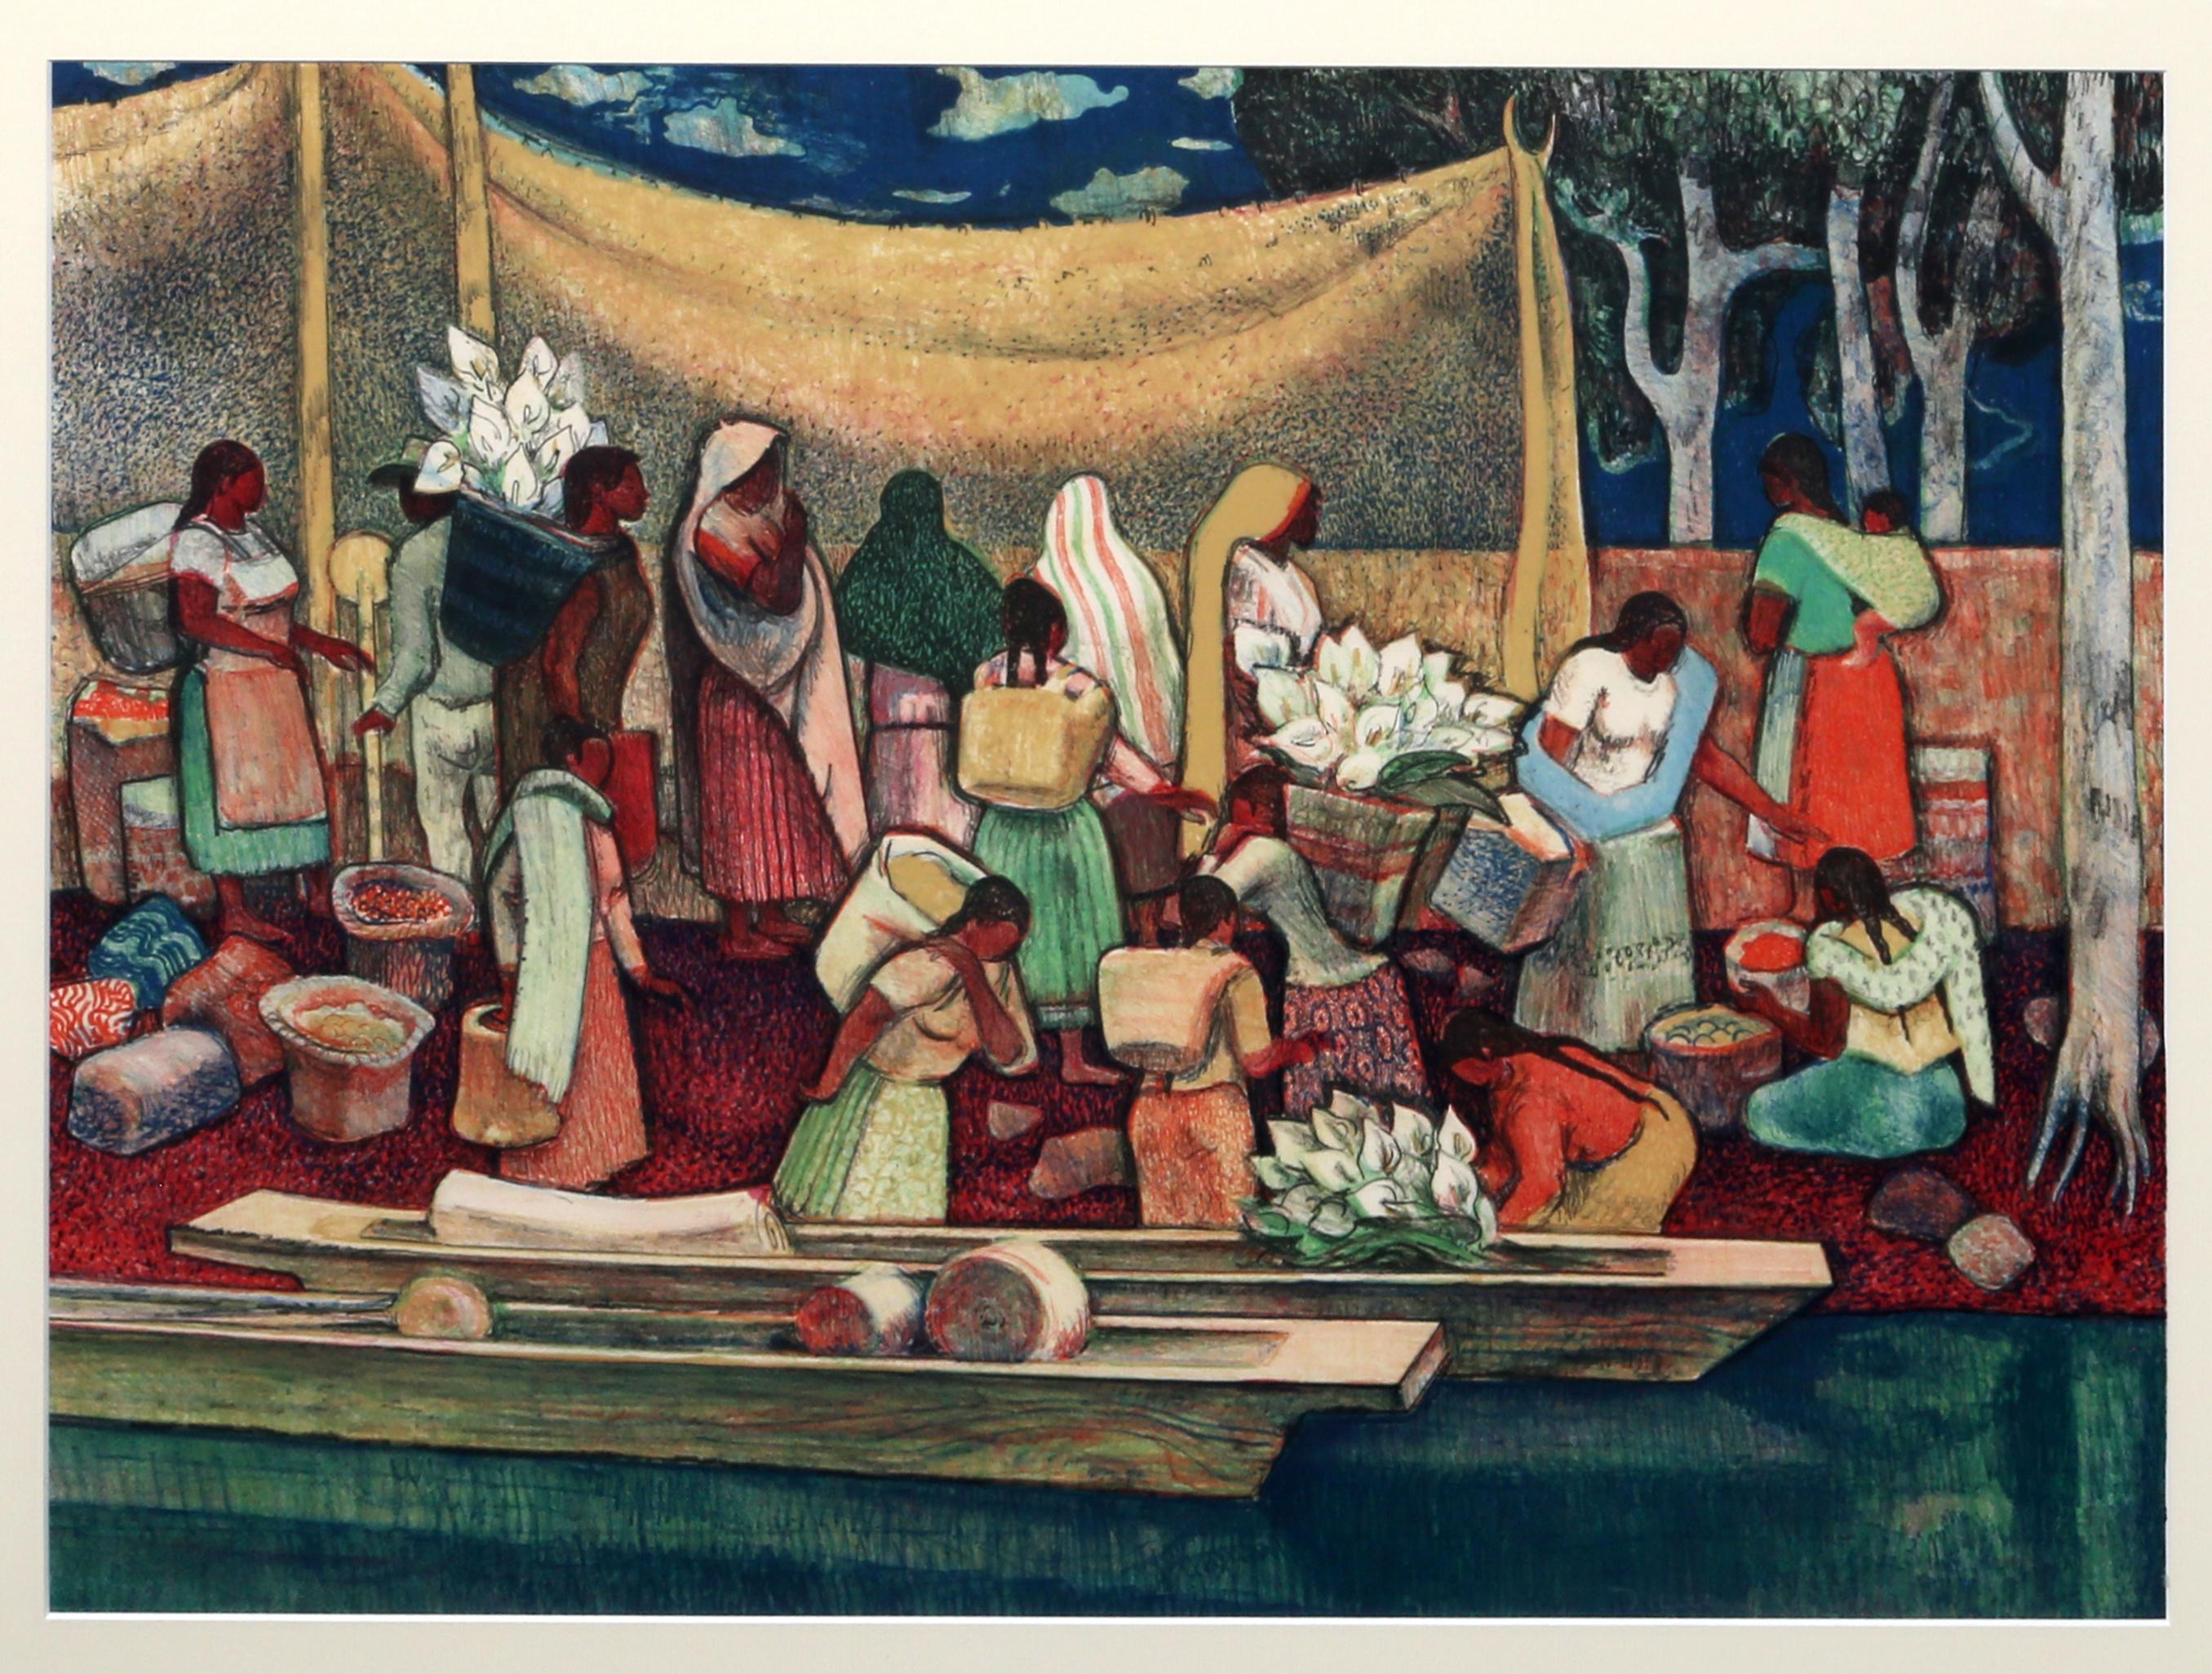 The Gathering by the River, Millard Sheets 1949